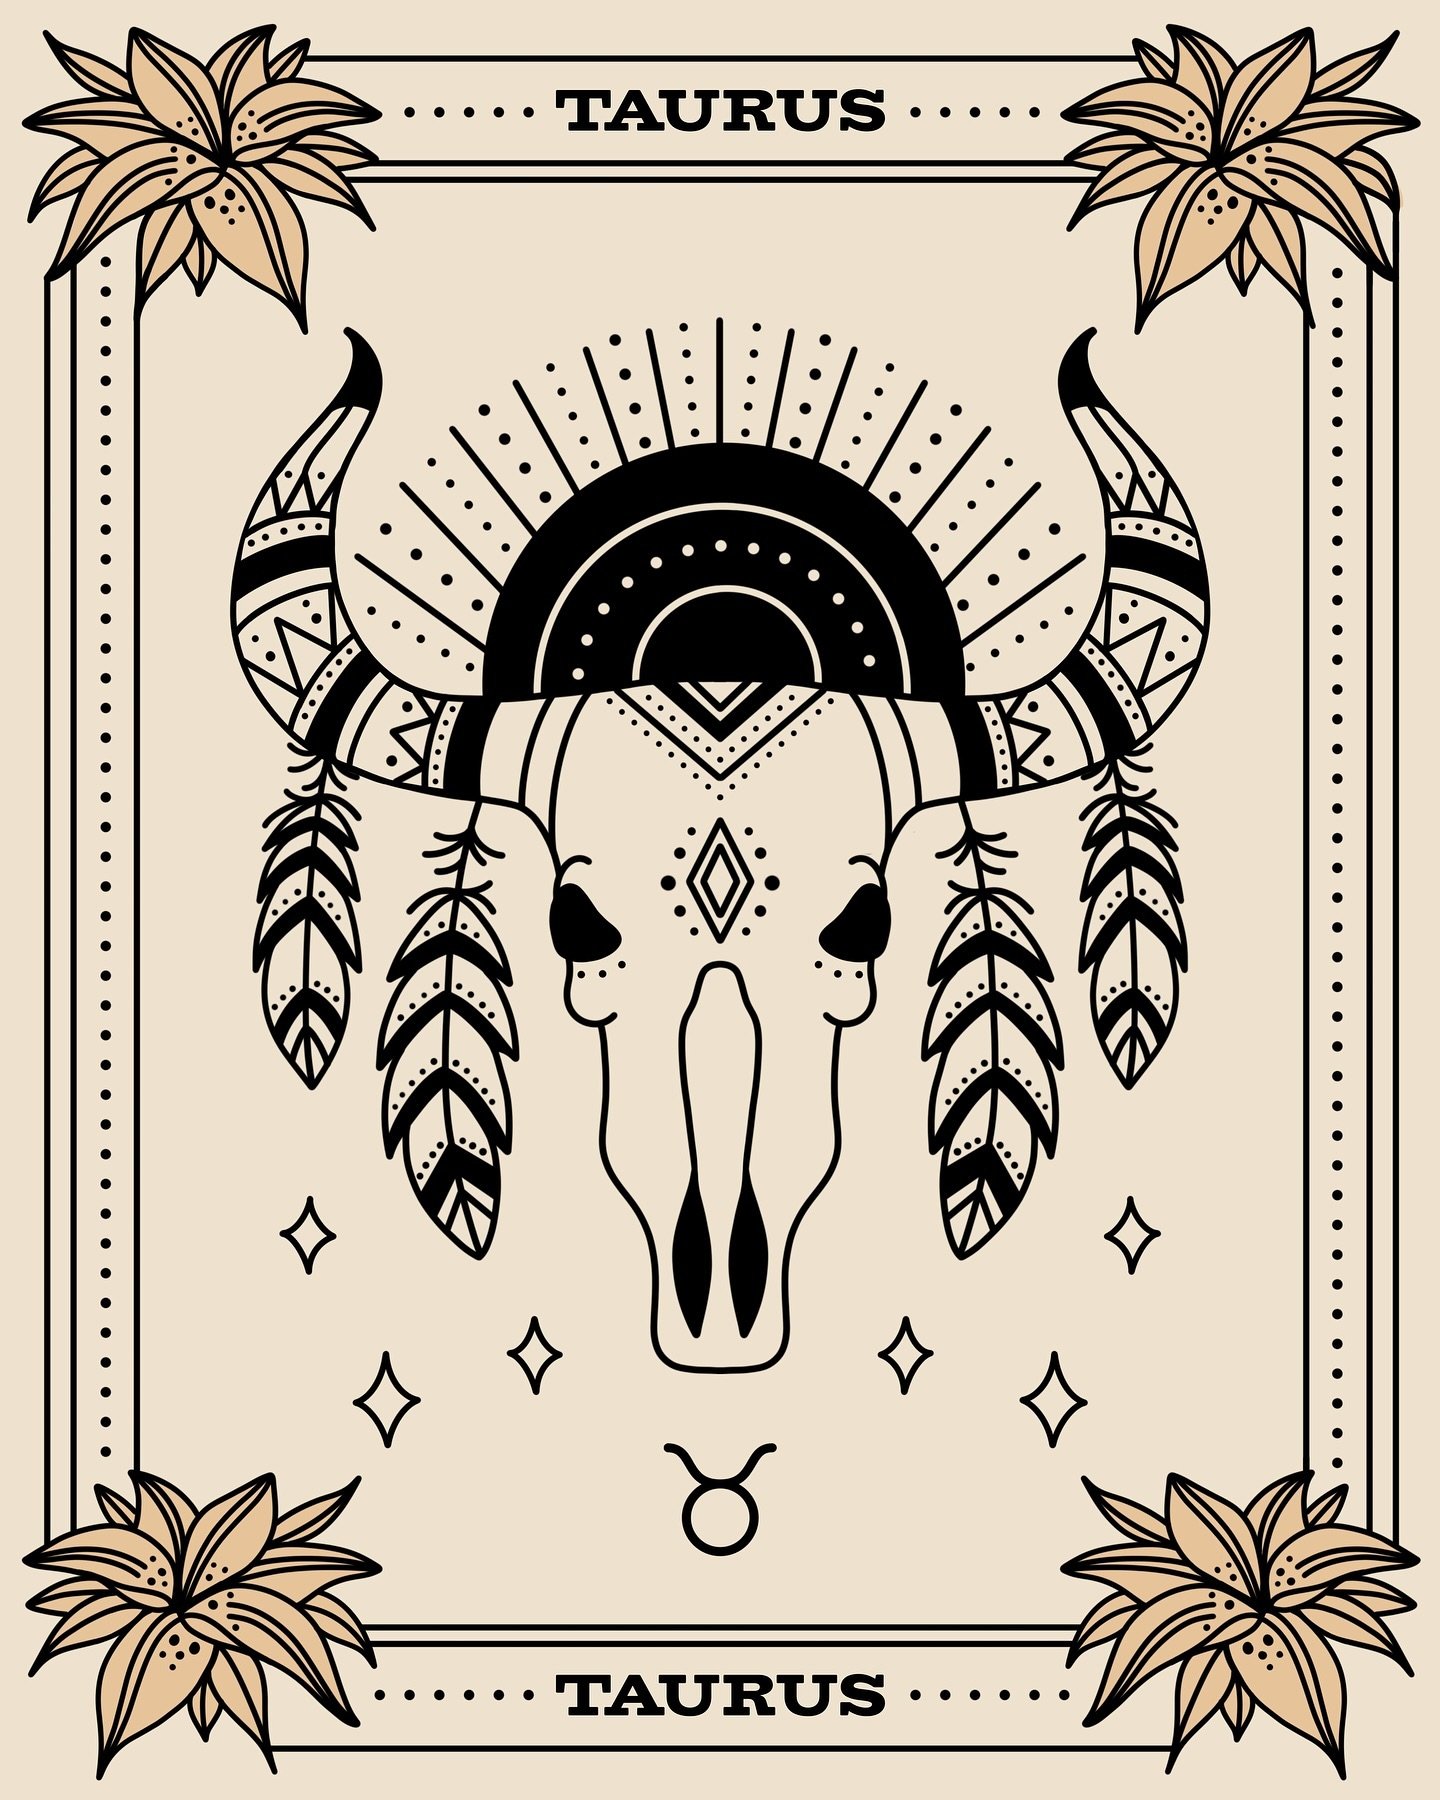 Happy Taurus Season! ♉️ ✨

Taurus is the second sign of the zodiac, representing growth and development. The Bull is usually depicted as stubborn and confrontative, but in the interest of harmony can be surprisingly flexible. Taurus represents the nu